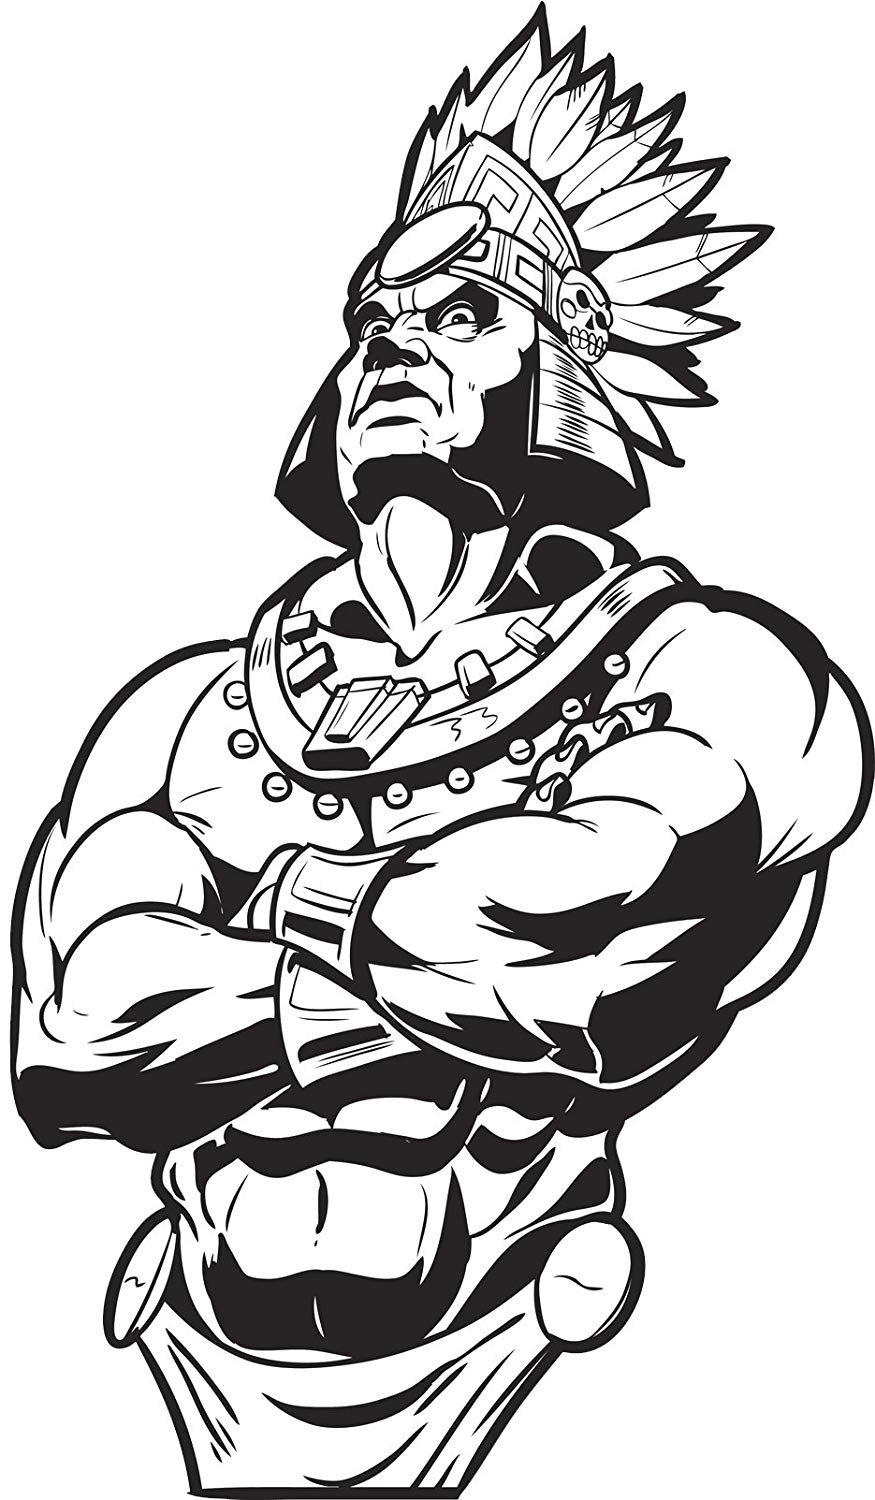 Featured image of post Native American Anime Drawing / Coloring pages with native american art drawings for coloring or painting and coloring books.